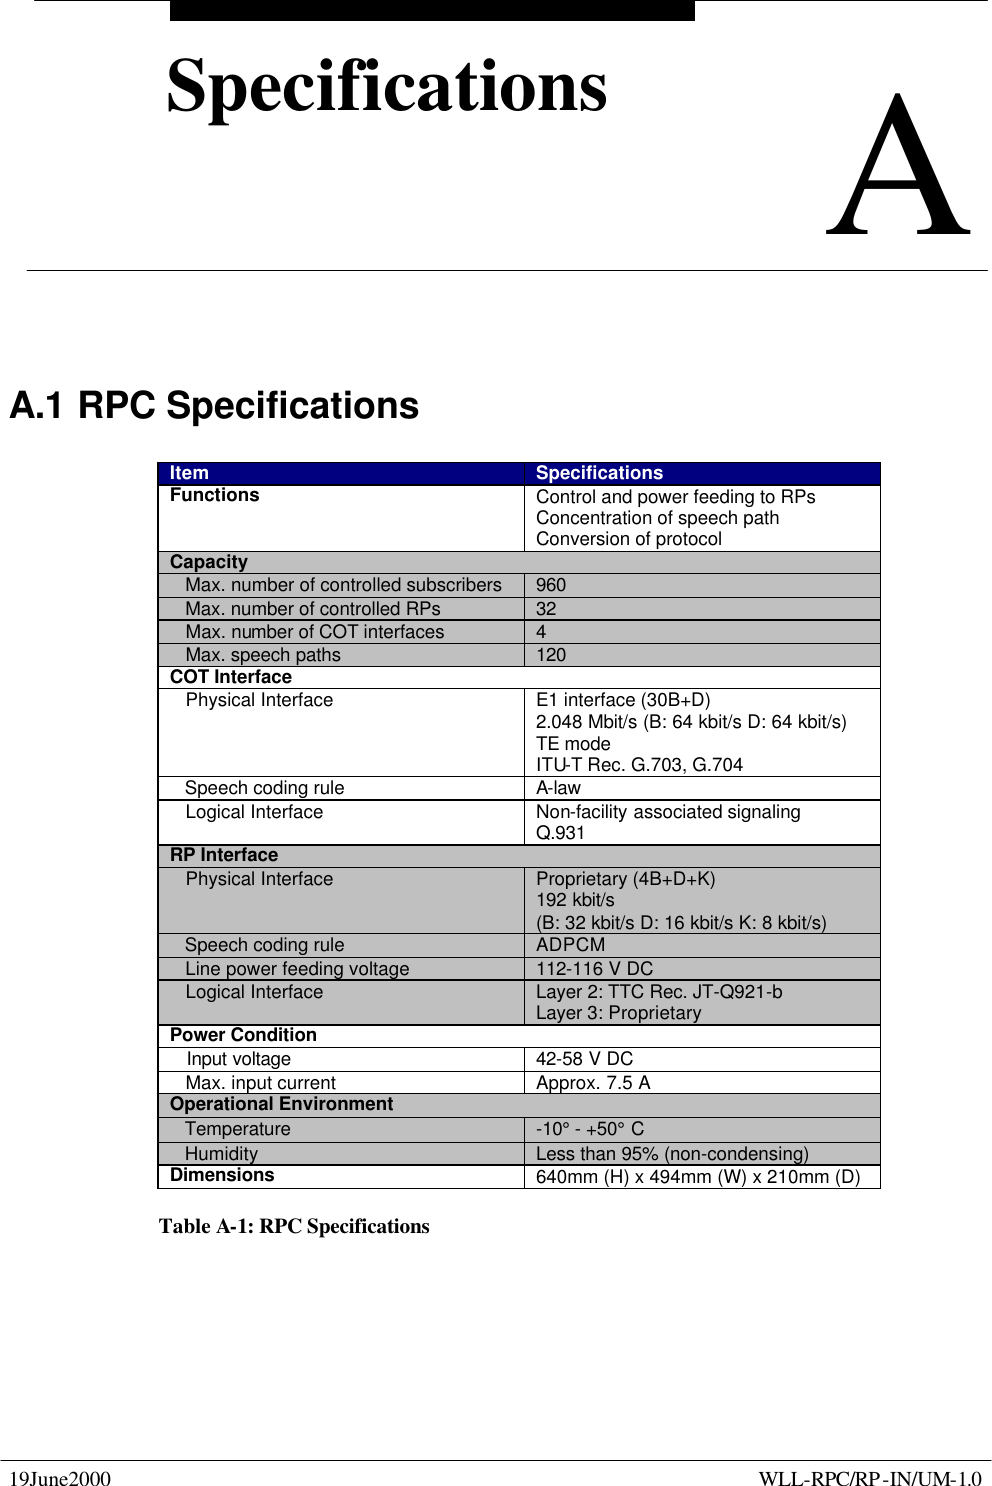  19June2000    WLL-RPC/RP-IN/UM-1.0  ASpecifications A  Specifications A.1 RPC Specifications Item Specifications Functions Control and power feeding to RPs Concentration of speech path Conversion of protocol Capacity    Max. number of controlled subscribers 960    Max. number of controlled RPs 32    Max. number of COT interfaces 4    Max. speech paths 120 COT Interface    Physical Interface E1 interface (30B+D) 2.048 Mbit/s (B: 64 kbit/s D: 64 kbit/s) TE mode ITU-T Rec. G.703, G.704    Speech coding rule A-law    Logical Interface Non-facility associated signaling Q.931 RP Interface    Physical Interface Proprietary (4B+D+K) 192 kbit/s (B: 32 kbit/s D: 16 kbit/s K: 8 kbit/s)    Speech coding rule ADPCM    Line power feeding voltage 112-116 V DC    Logical Interface Layer 2: TTC Rec. JT-Q921-b Layer 3: Proprietary Power Condition    Input voltage 42-58 V DC    Max. input current Approx. 7.5 A Operational Environment    Temperature -10° - +50° C    Humidity Less than 95% (non-condensing) Dimensions 640mm (H) x 494mm (W) x 210mm (D) Table A-1: RPC Specifications 